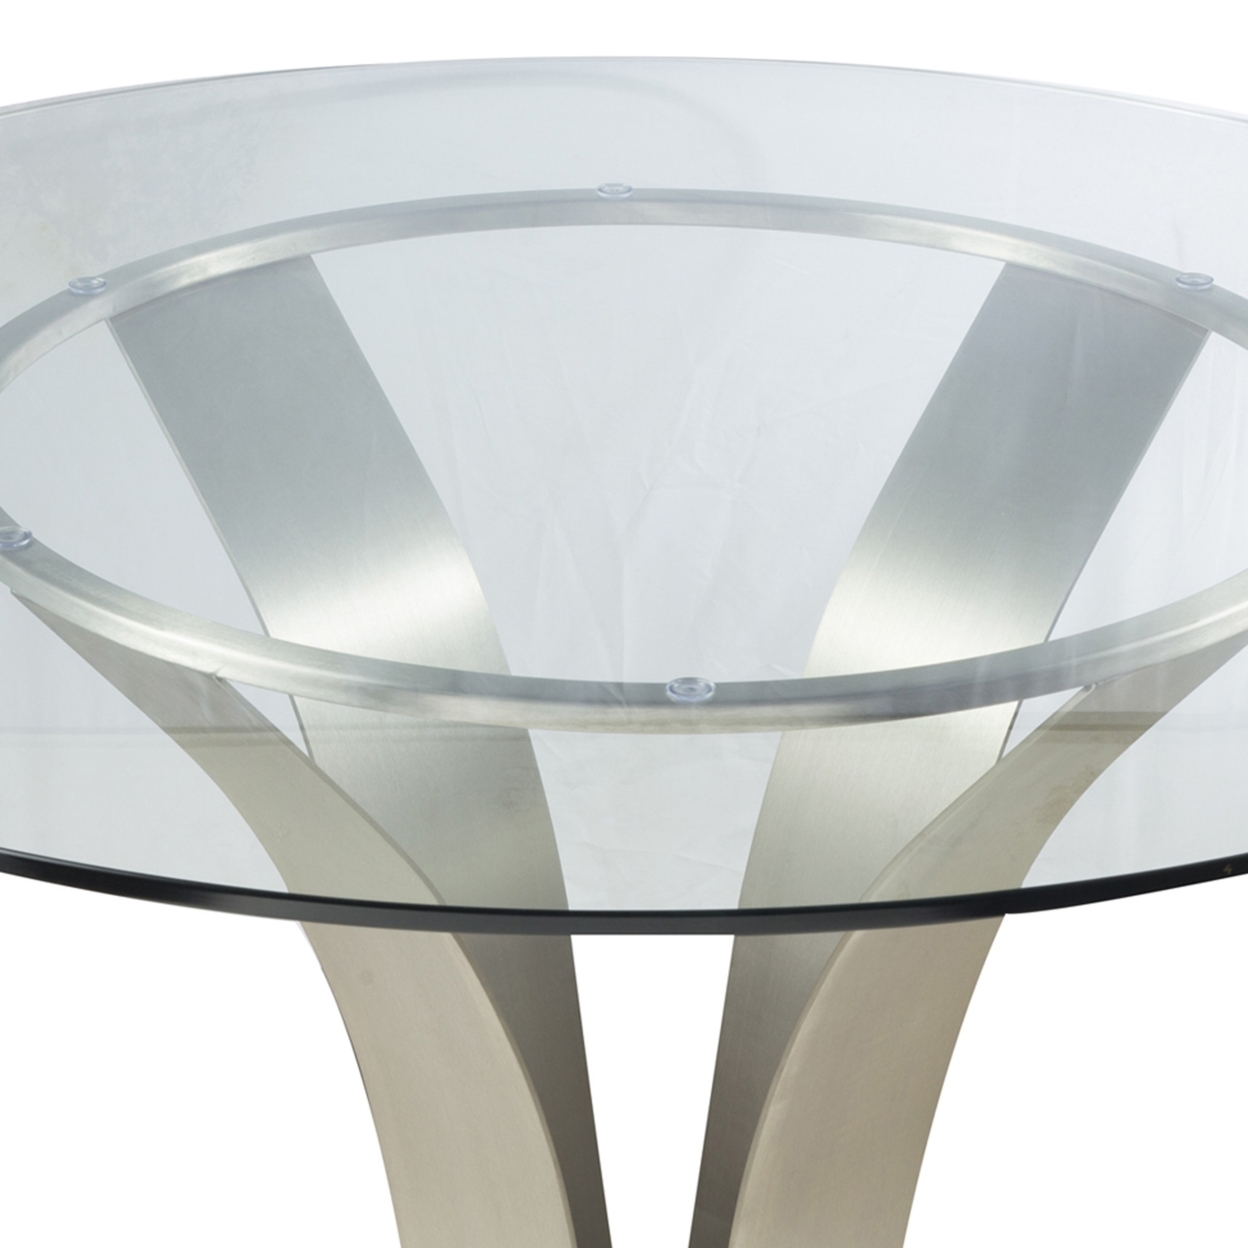 48 Inch Dining Table With Round Glass Top And Metal Base, Chrome- Saltoro Sherpi